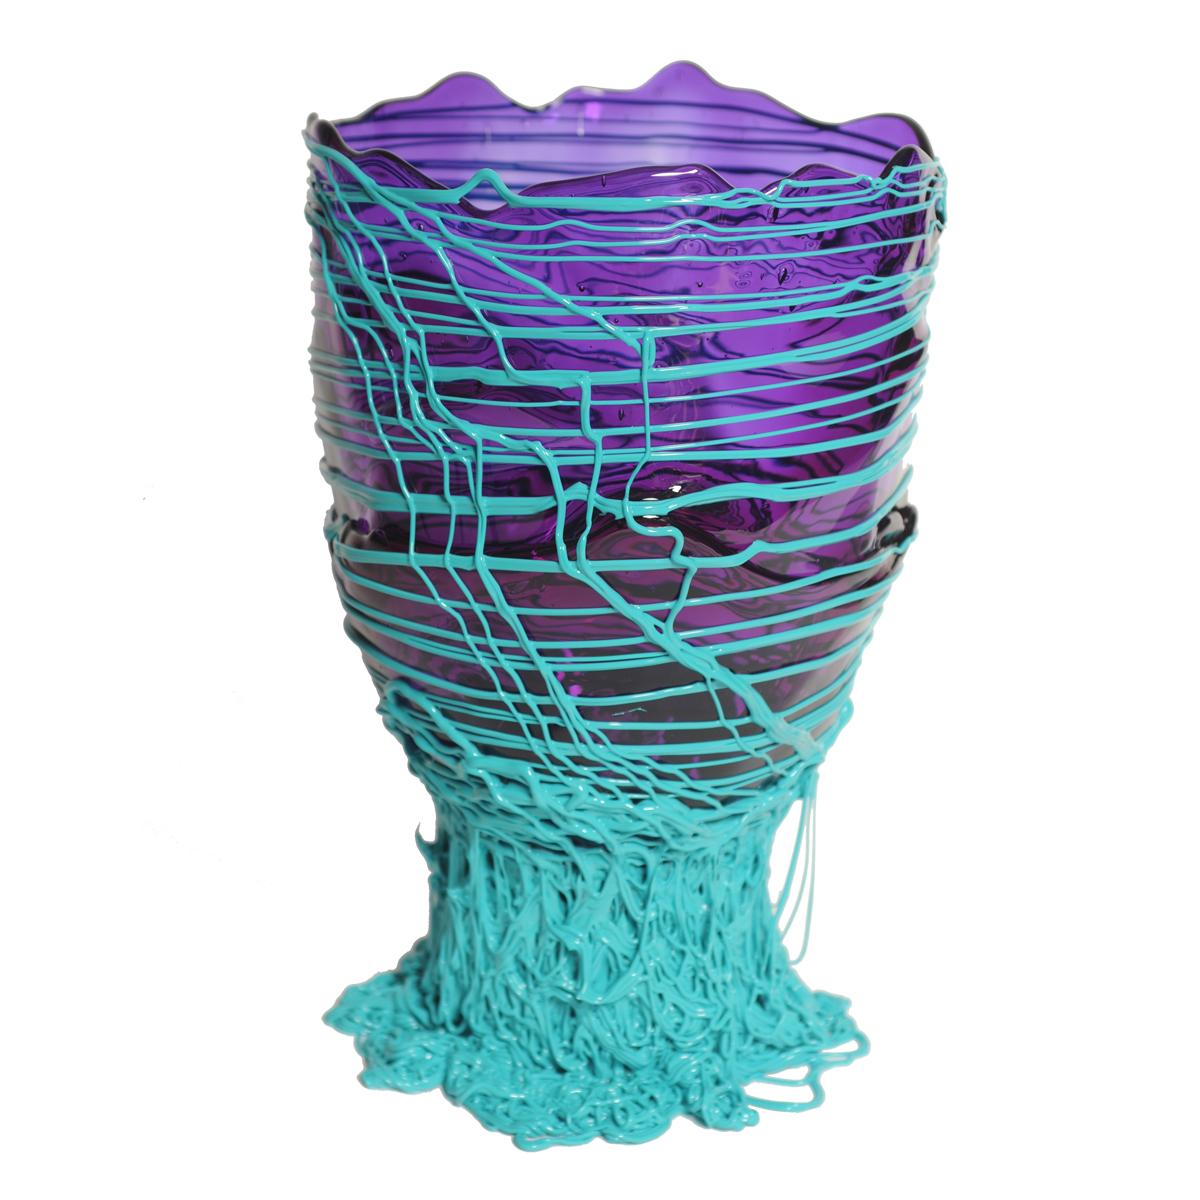 Spaghetti vase, purple, turquoise.

Vase in soft resin designed by Gaetano Pesce in 1995 for Fish Design collection.

Measures: XL - ø 30cm x H 56cm

Other sizes available.

Colours: purple, turquoise.
Vase in soft resin designed by Gaetano